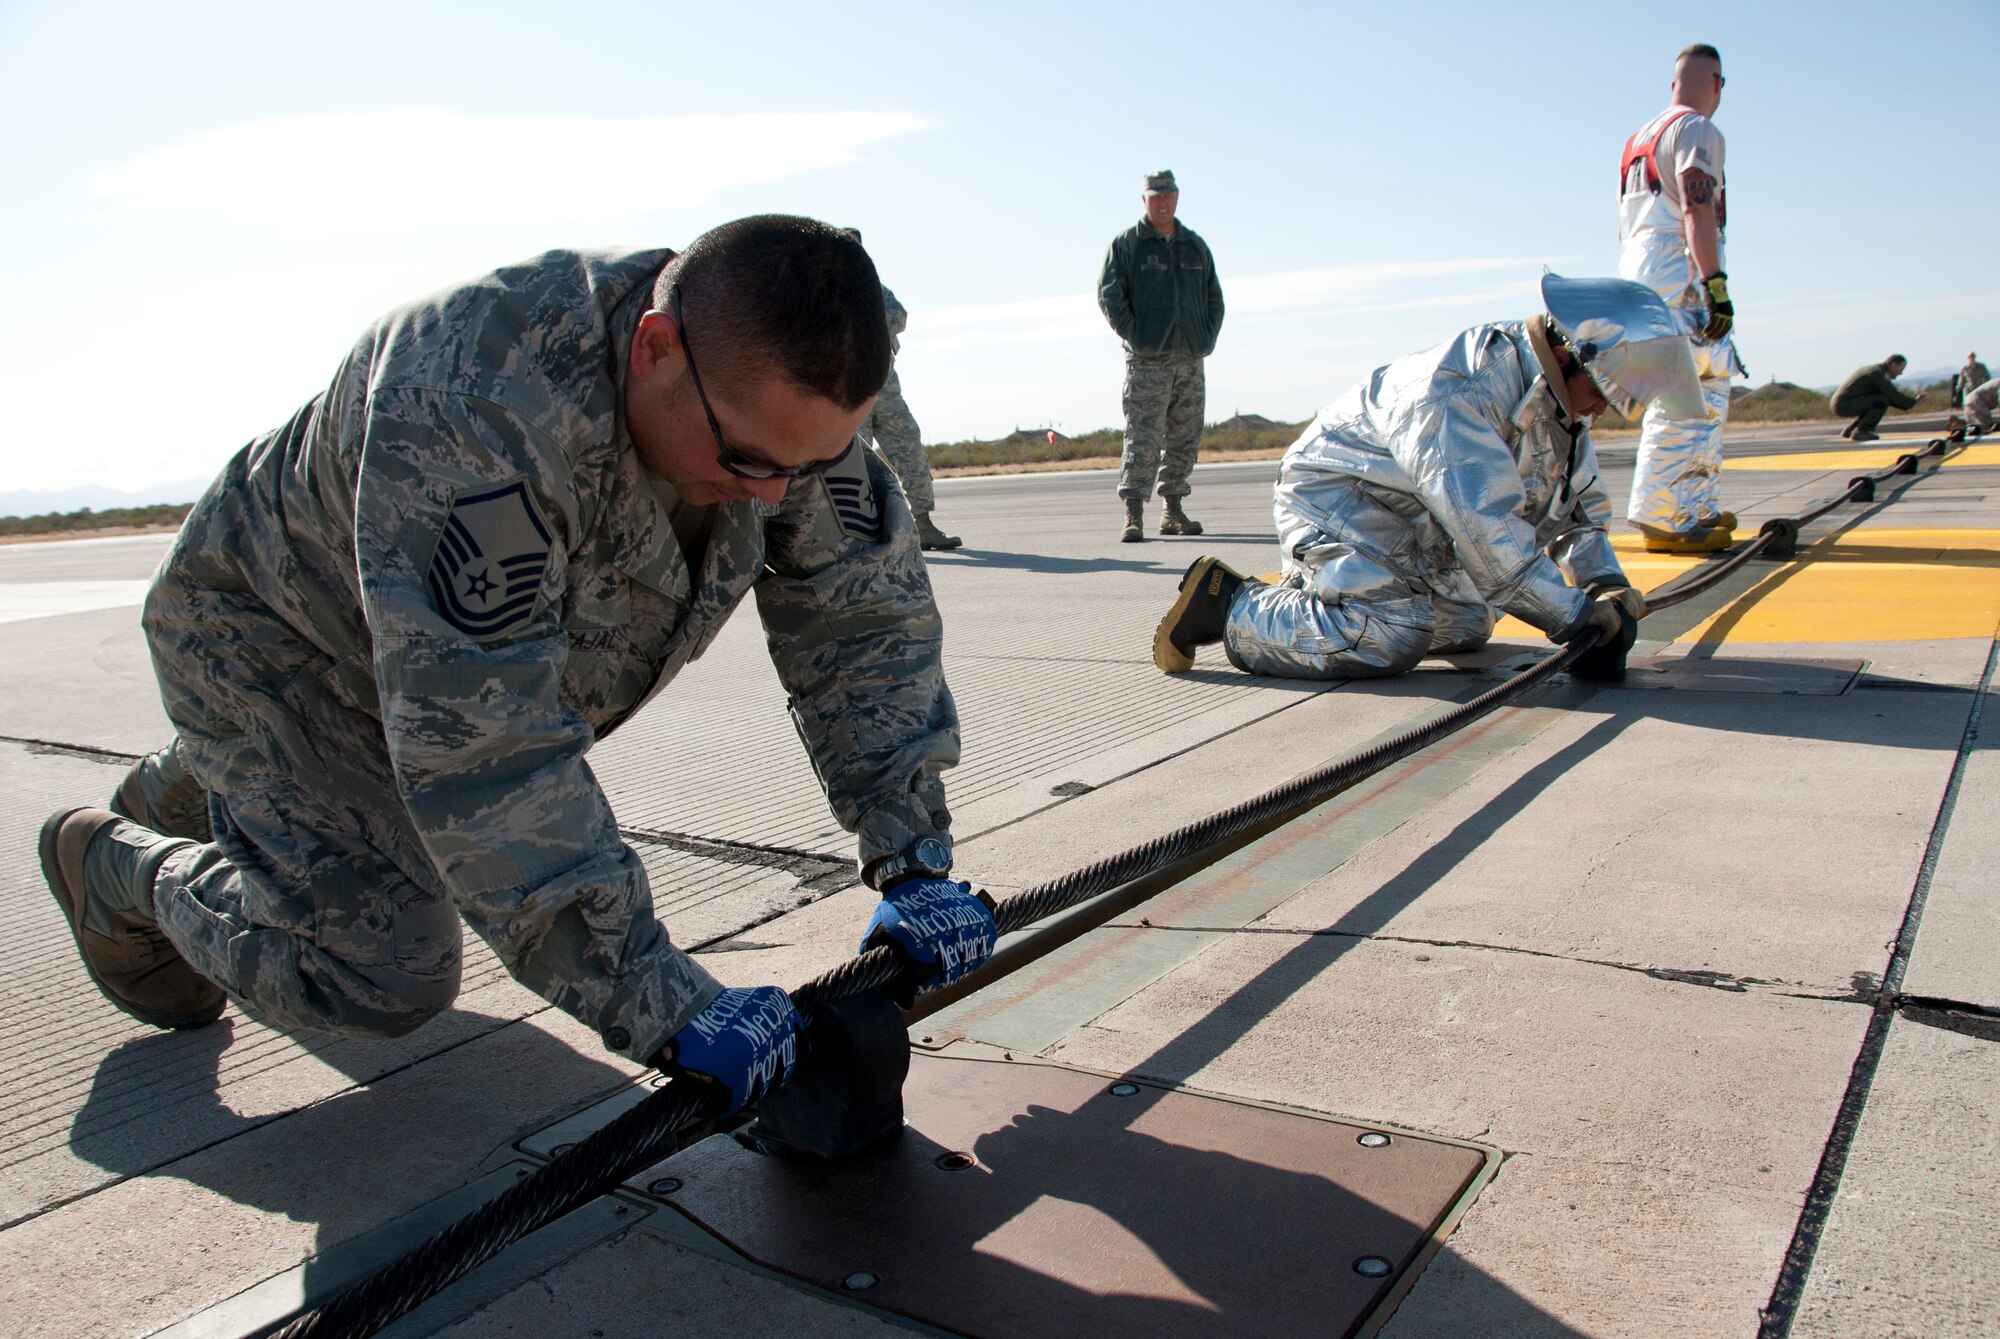 Master Sgt. Osbaldo Carbajal, 162nd Civil Engineer Squadron, reinstalls the barrier catch cable on the Tucson International Airport runway after it was tested Dec. 3. (U.S. Air Force photo/Master Sgt. Dave Dave Neve)